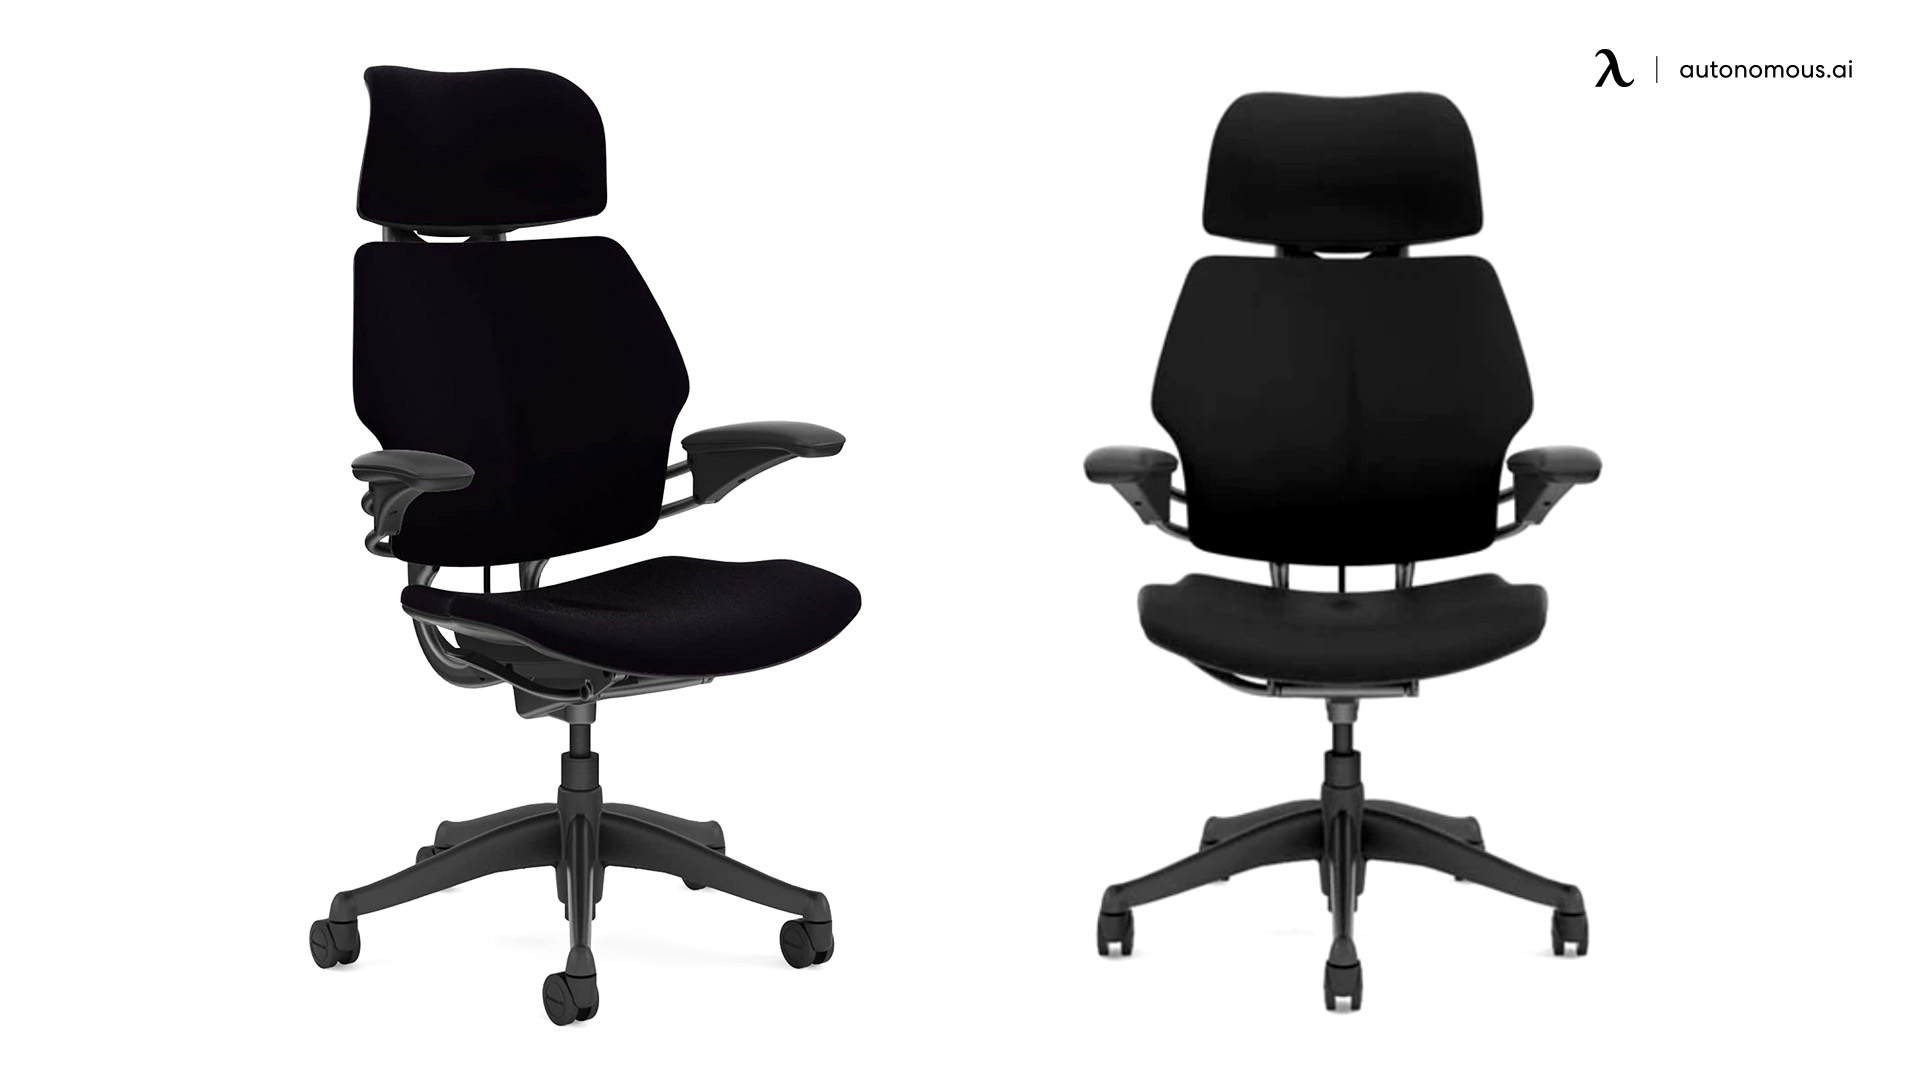 Humanscale Freedom Task Chair with Headrest